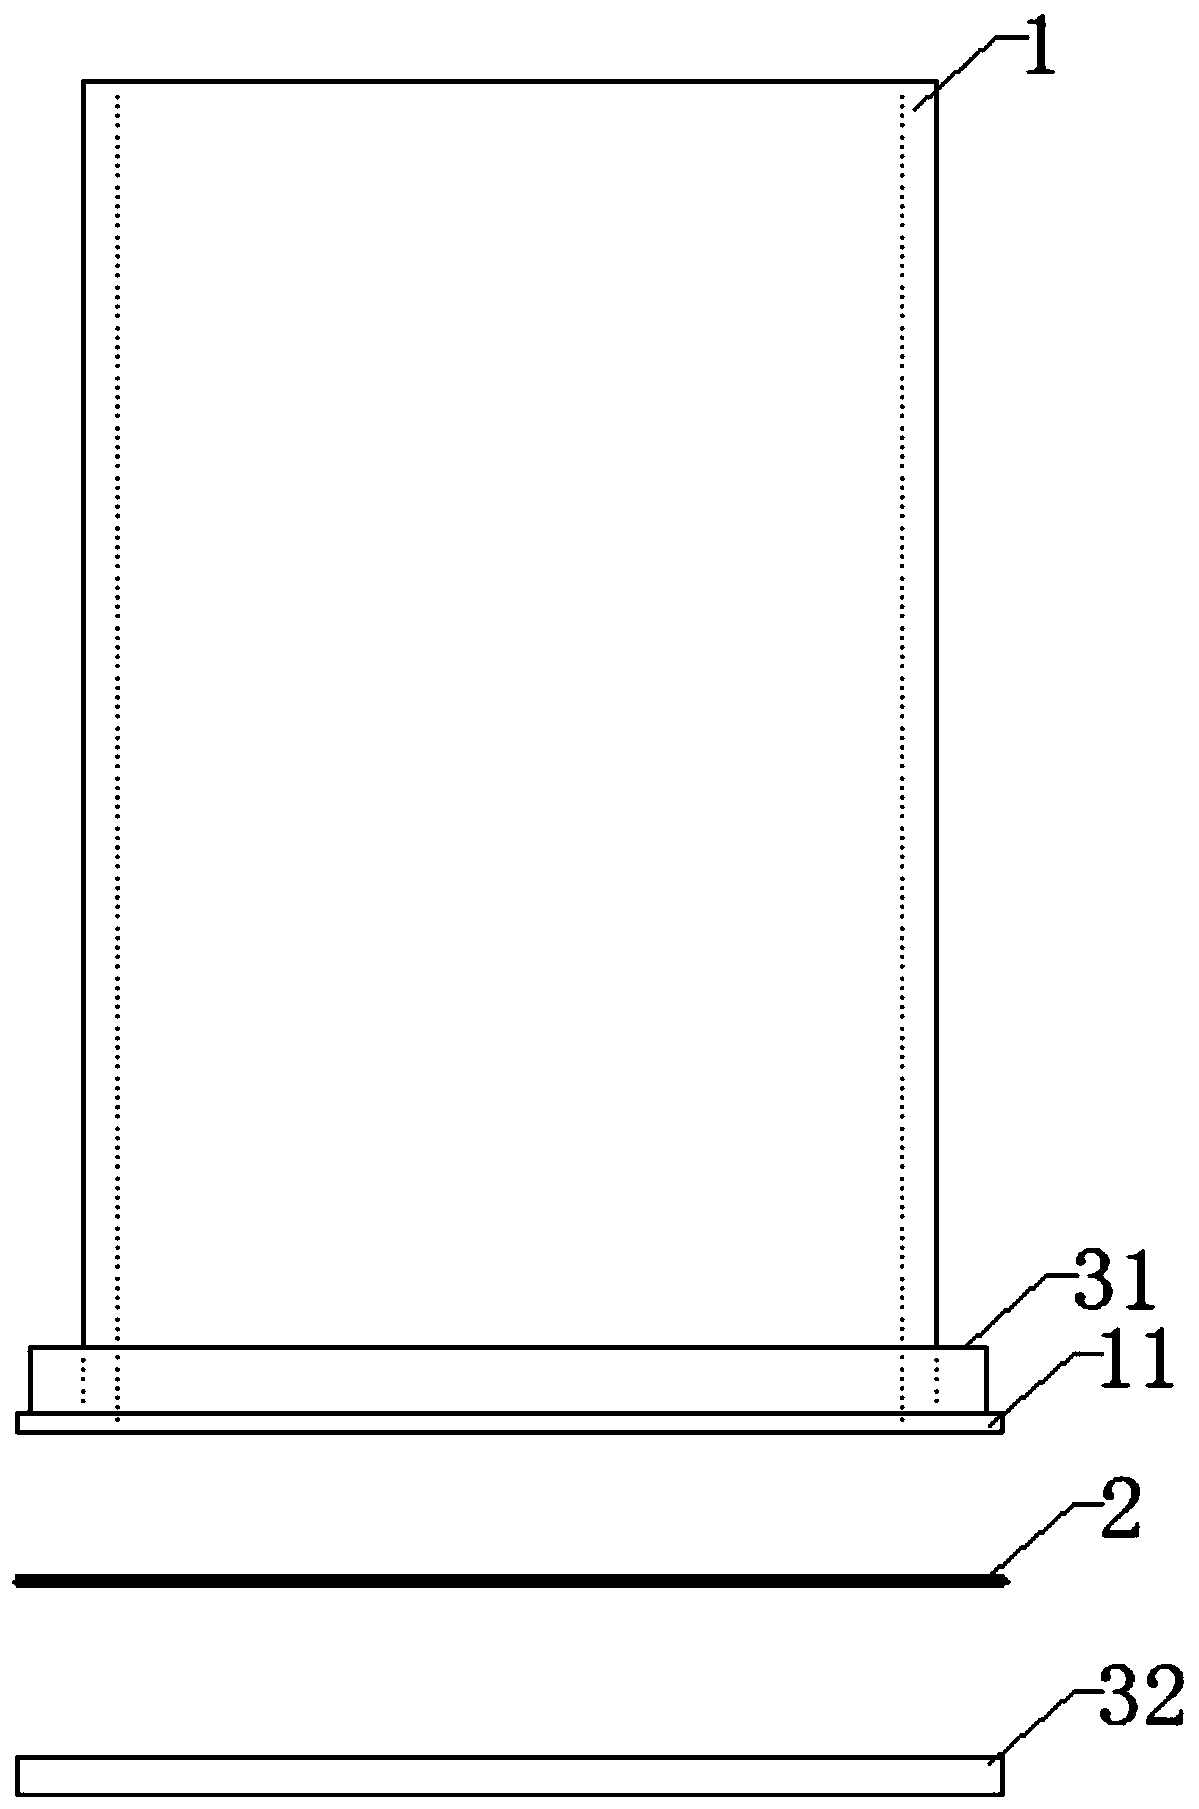 Semi-permeable membrane preparation, dialysis and Tyndall effect experiment device